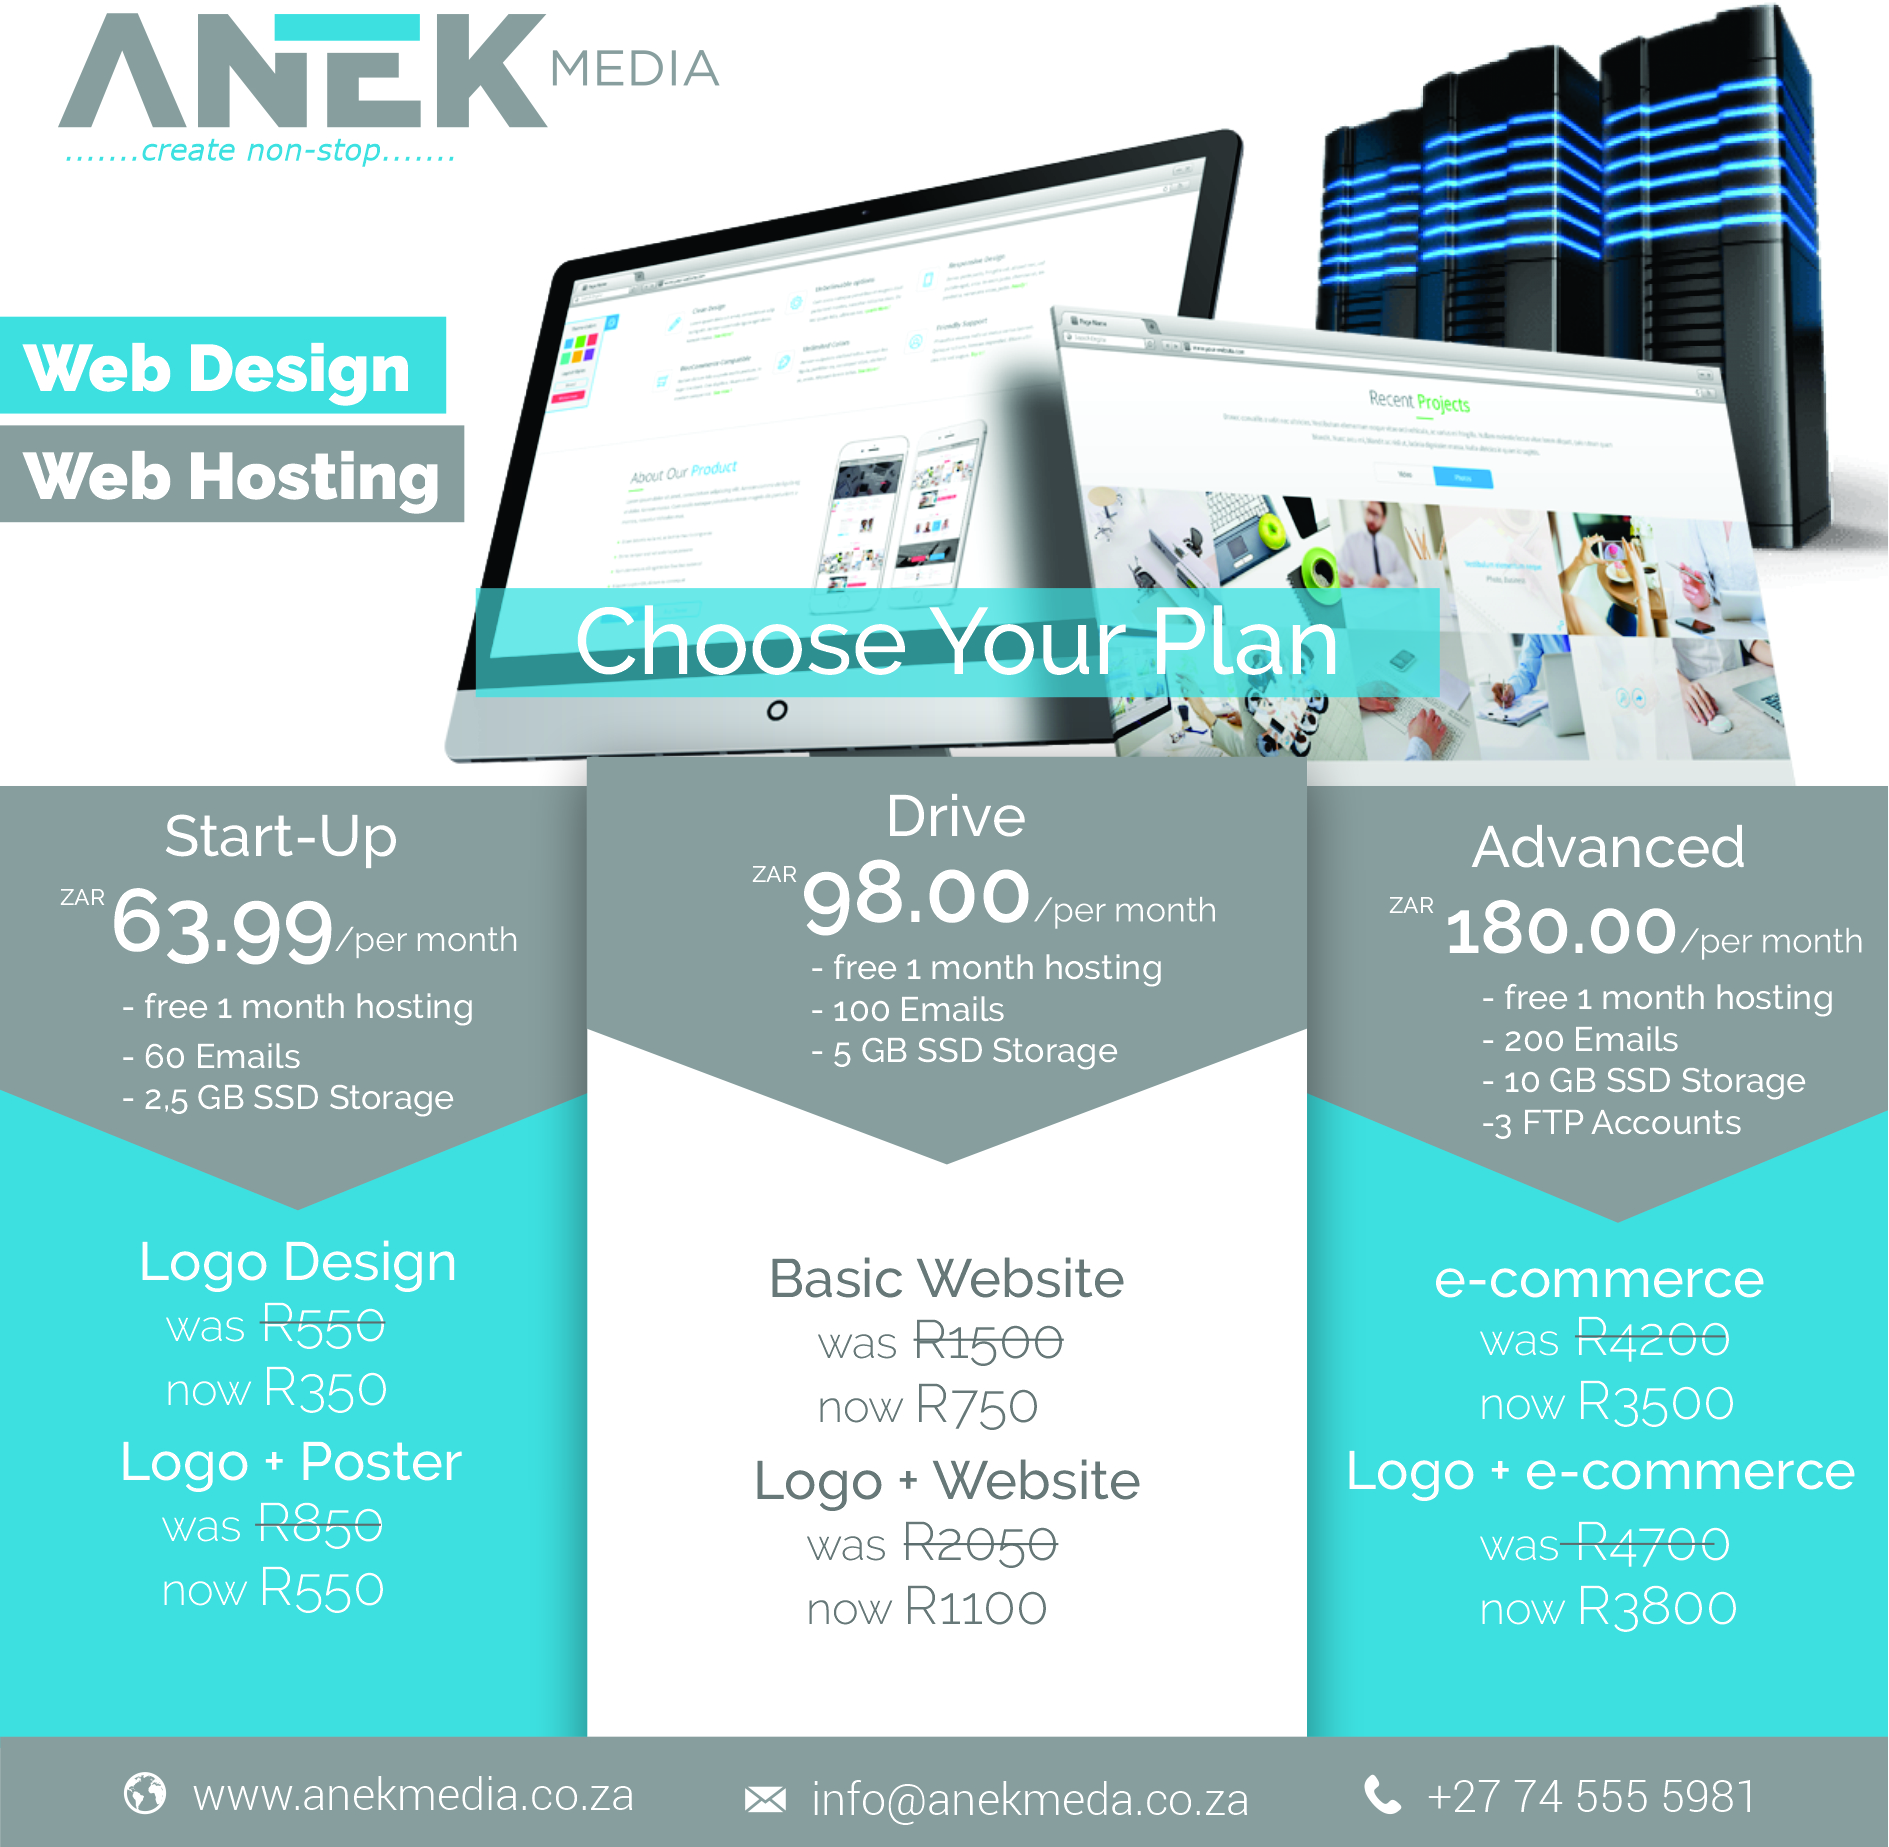 Web Design from R750